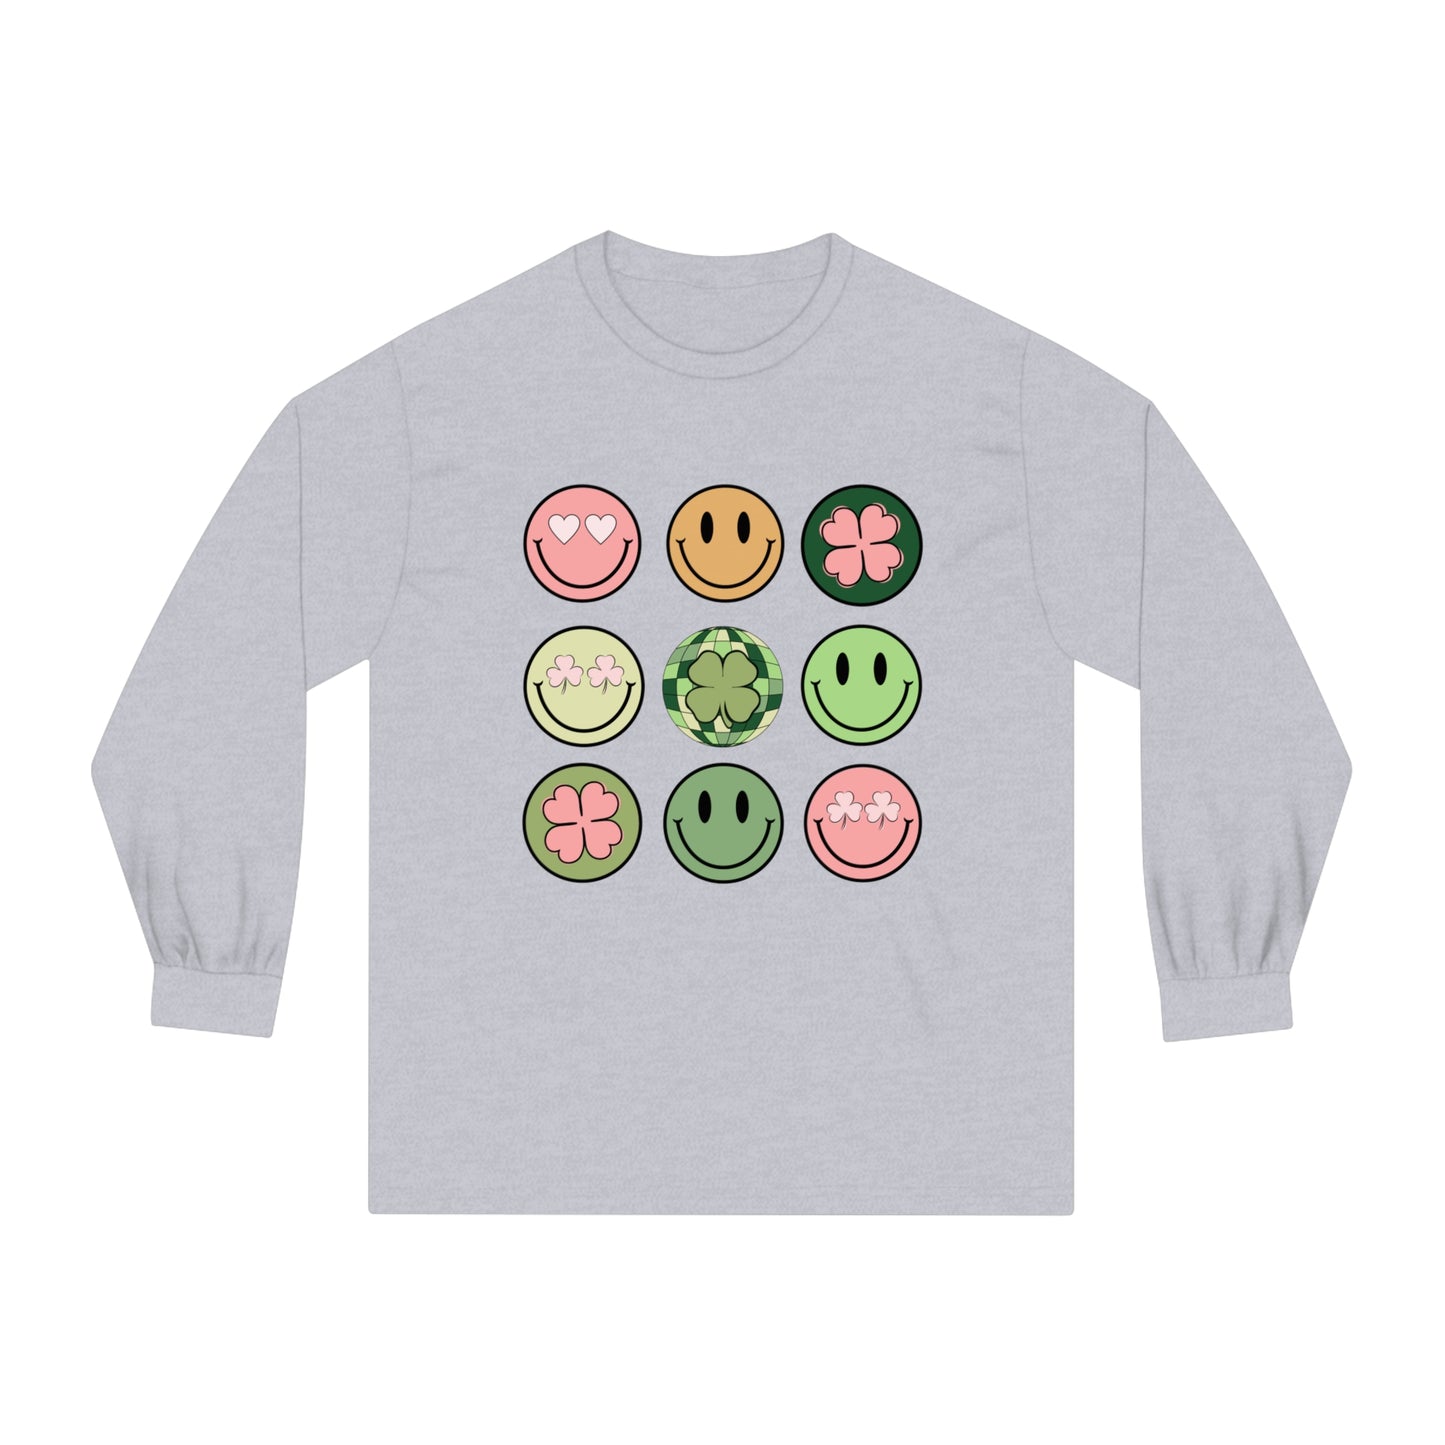 St. Patrick's Day Smiles - Unisex Classic Long Sleeve T-Shirt